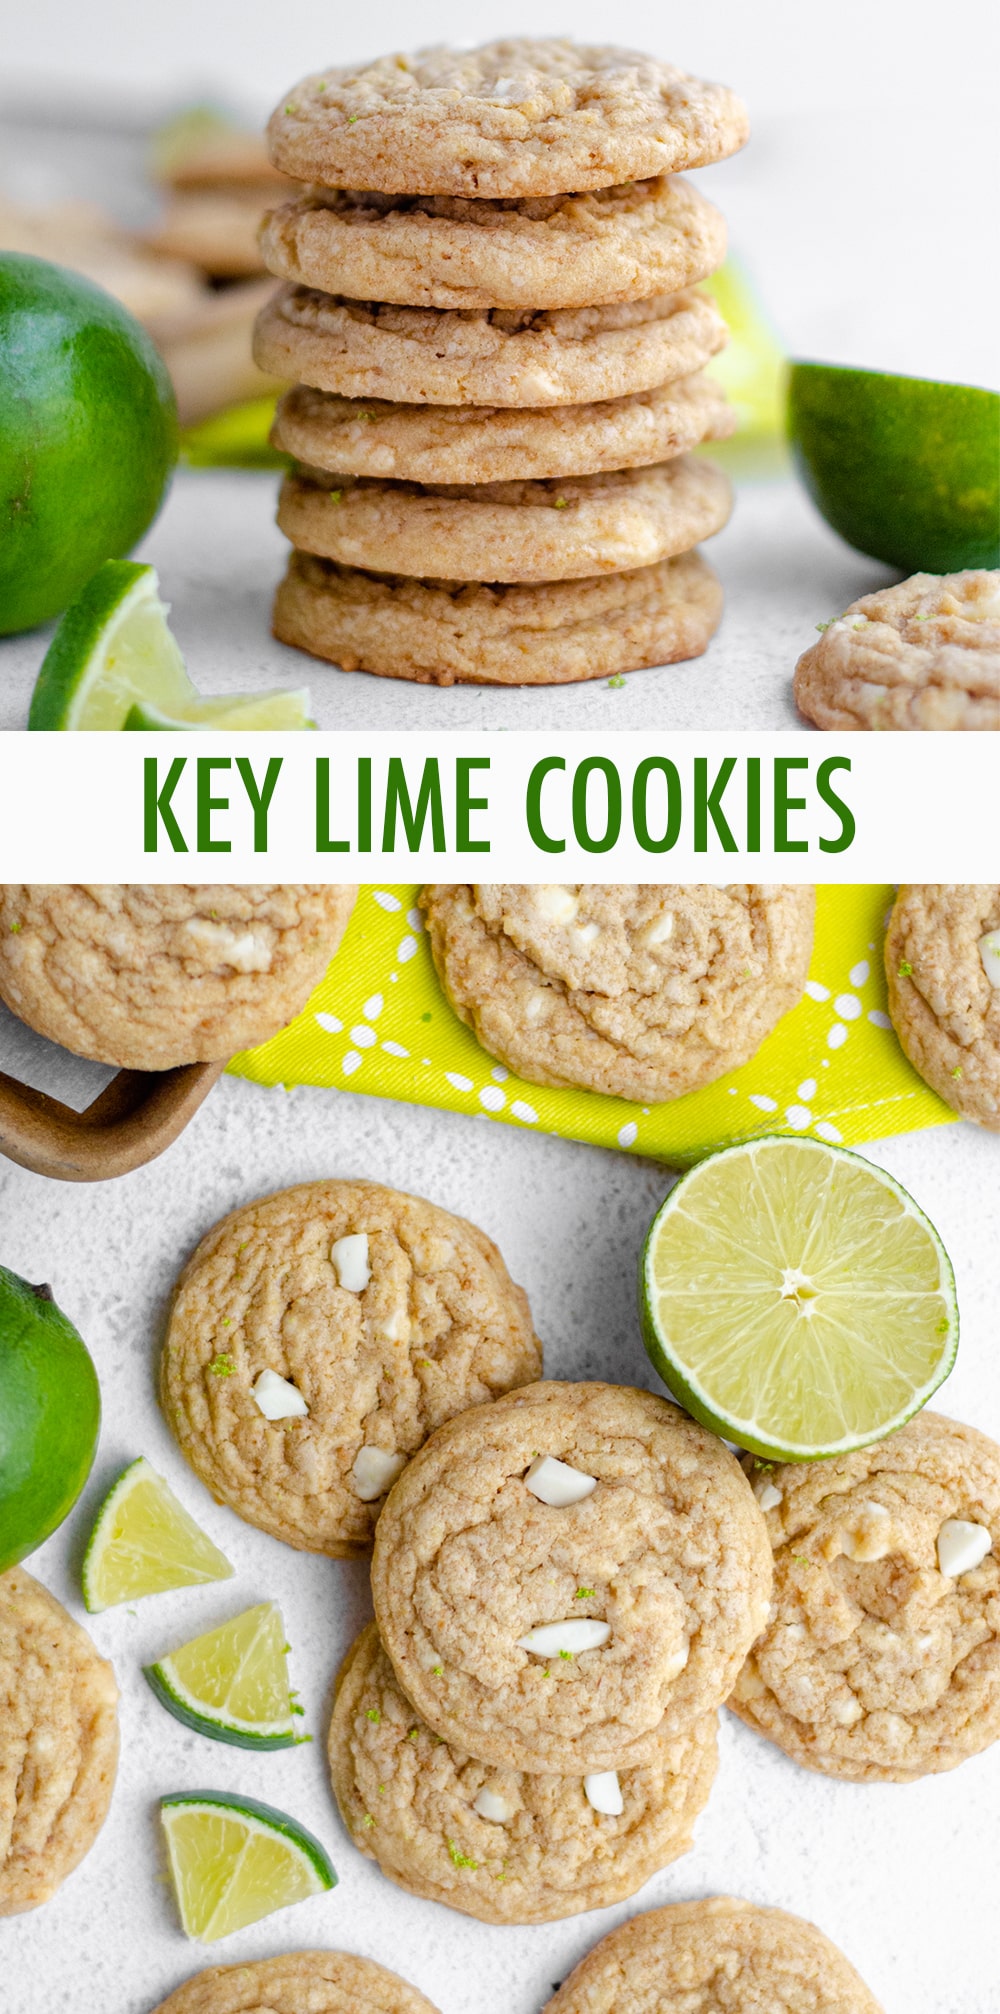 Easy drop cookies bursting with tangy Key lime juice, crunchy graham cracker crumbs, and creamy white chocolate. via @frshaprilflours